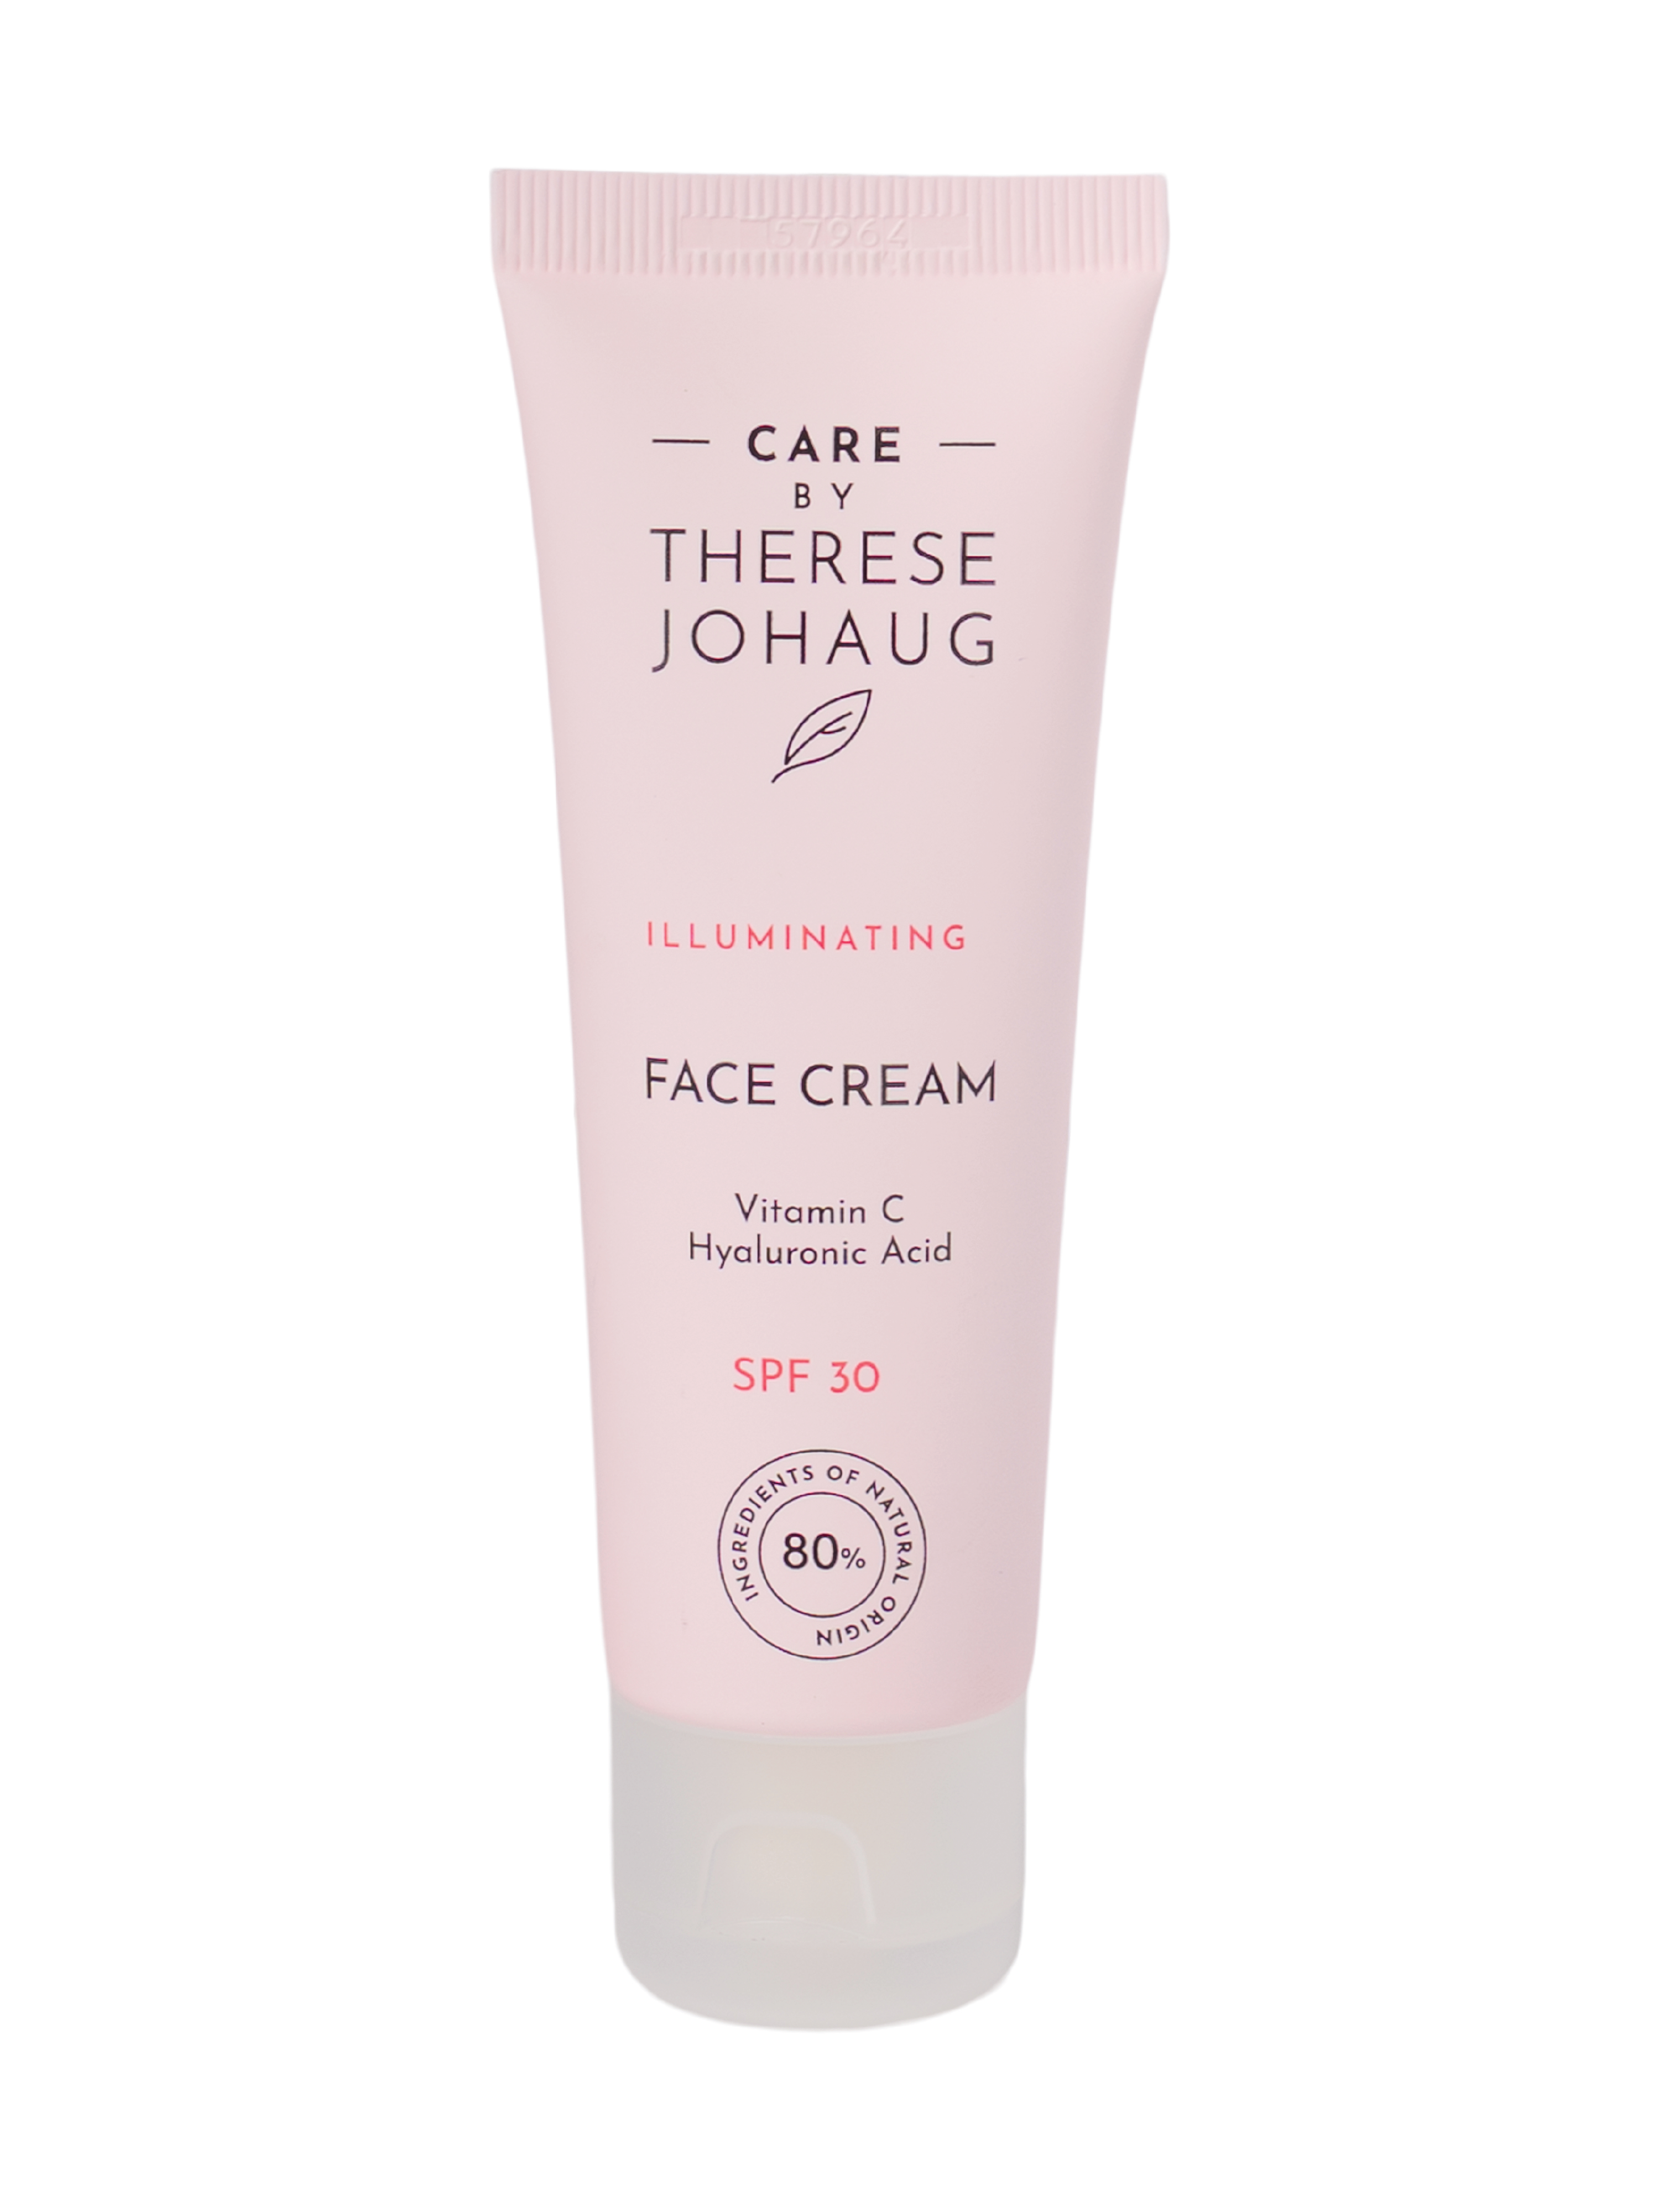 Care by Therese Johaug Face Cream SPF30, 50 ml